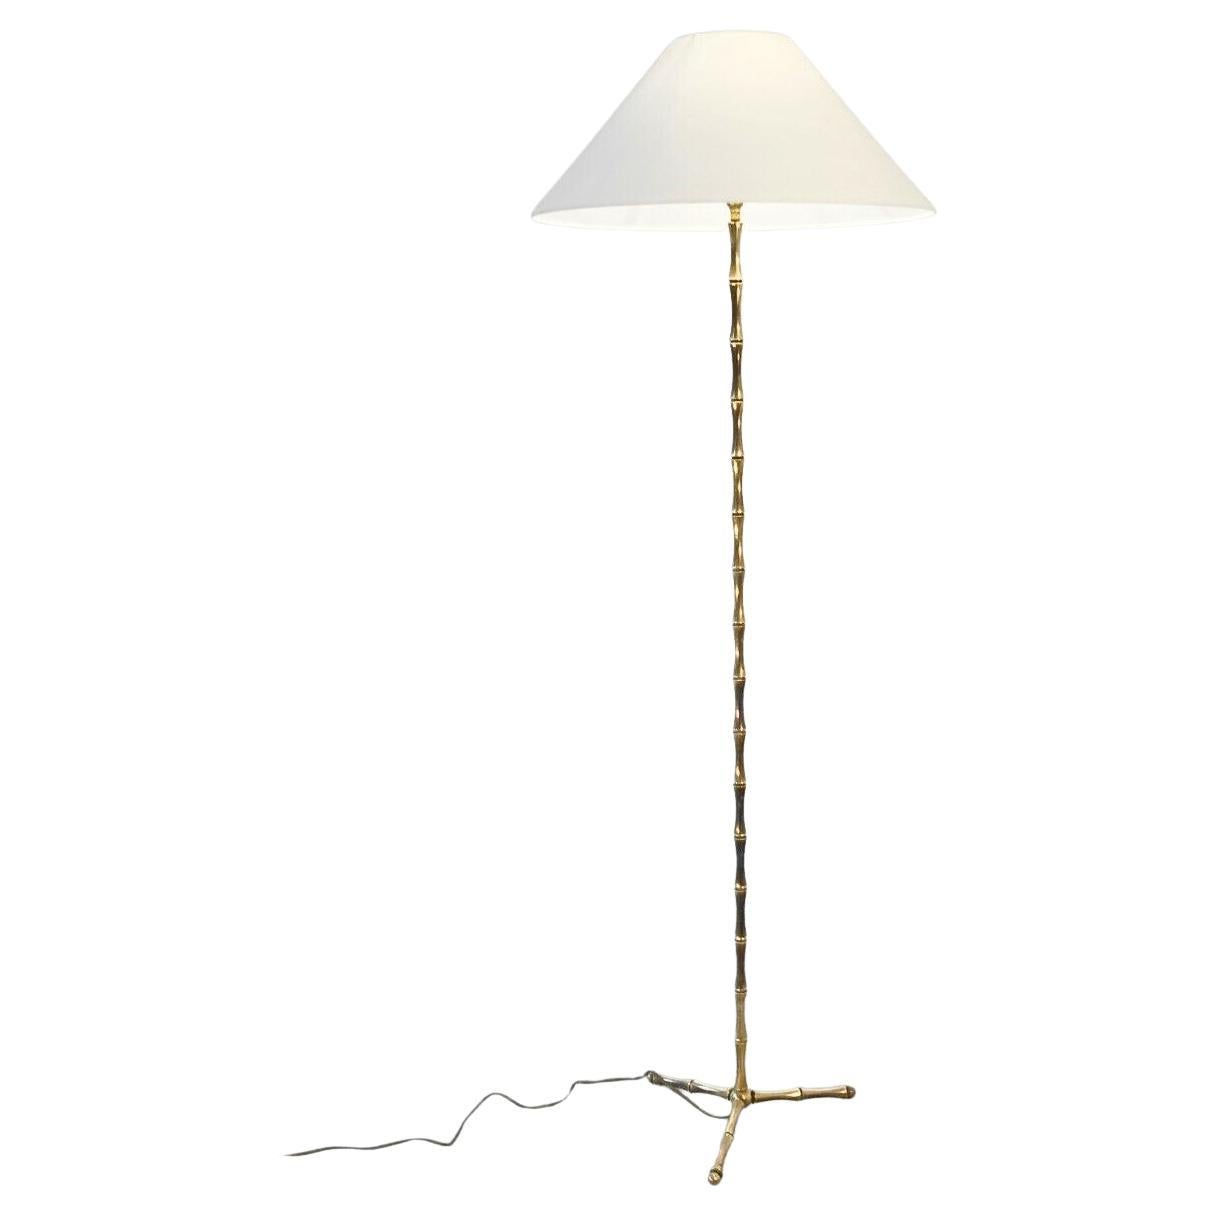 A SHABBY-CHIC NEO-CLASSIC "Bamboo" FLOOR LAMP par MAISON BAGUES, France 1960